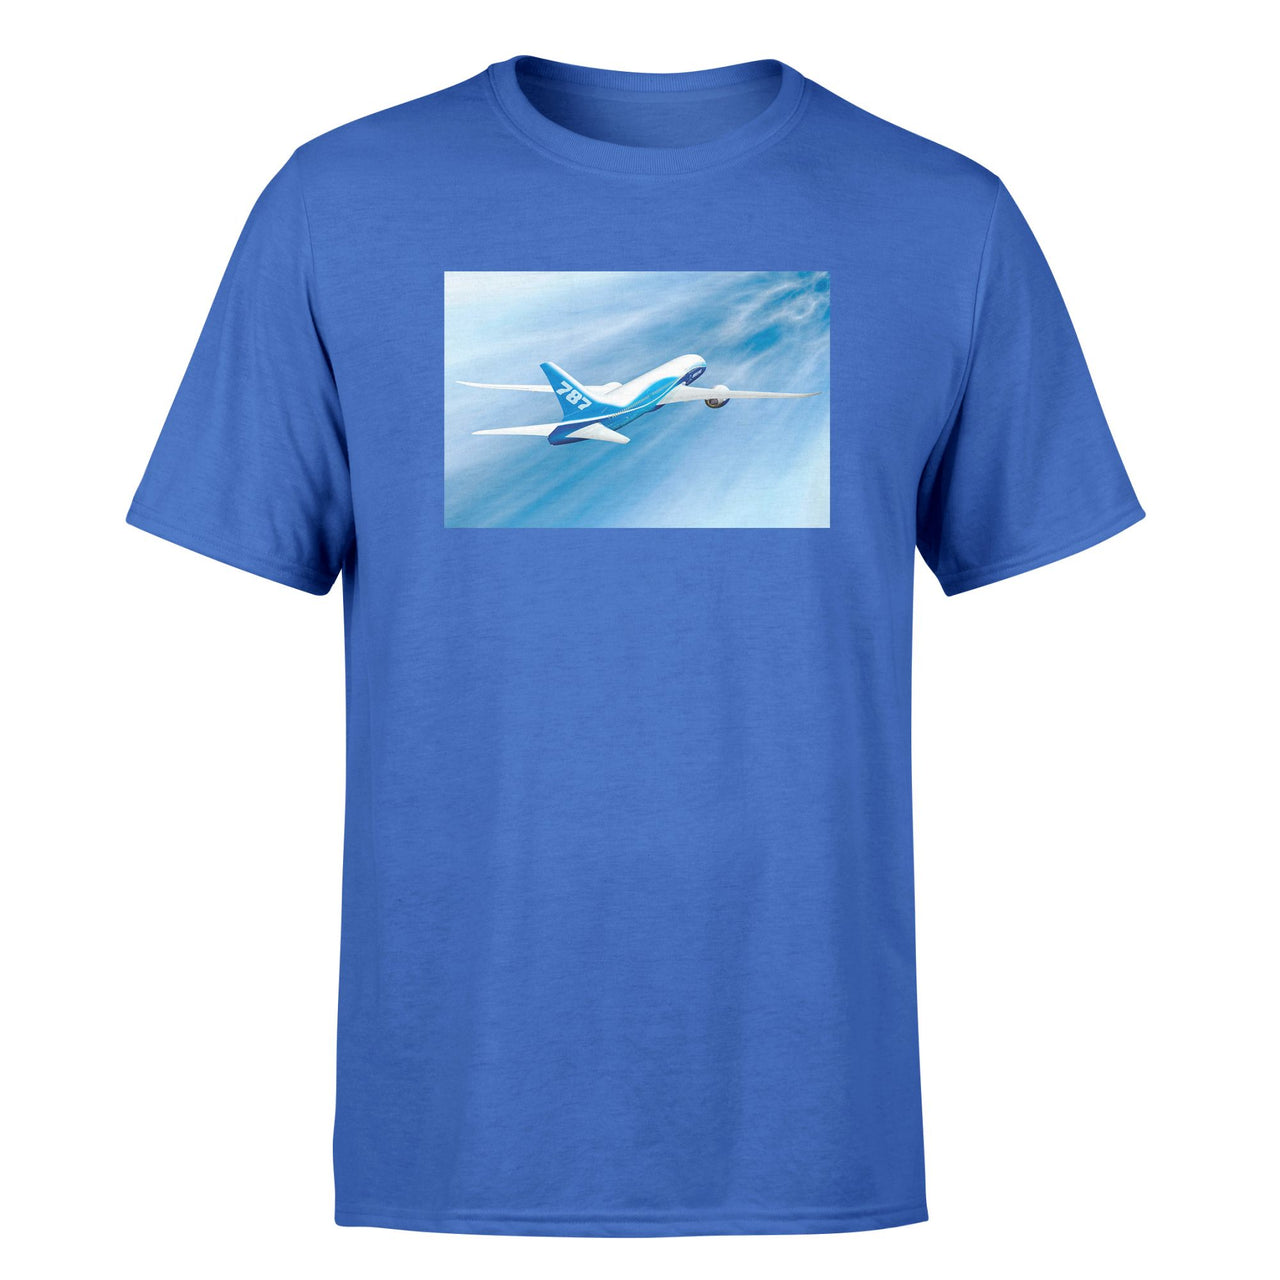 Beautiful Painting of Boeing 787 Dreamliner Designed T-Shirts